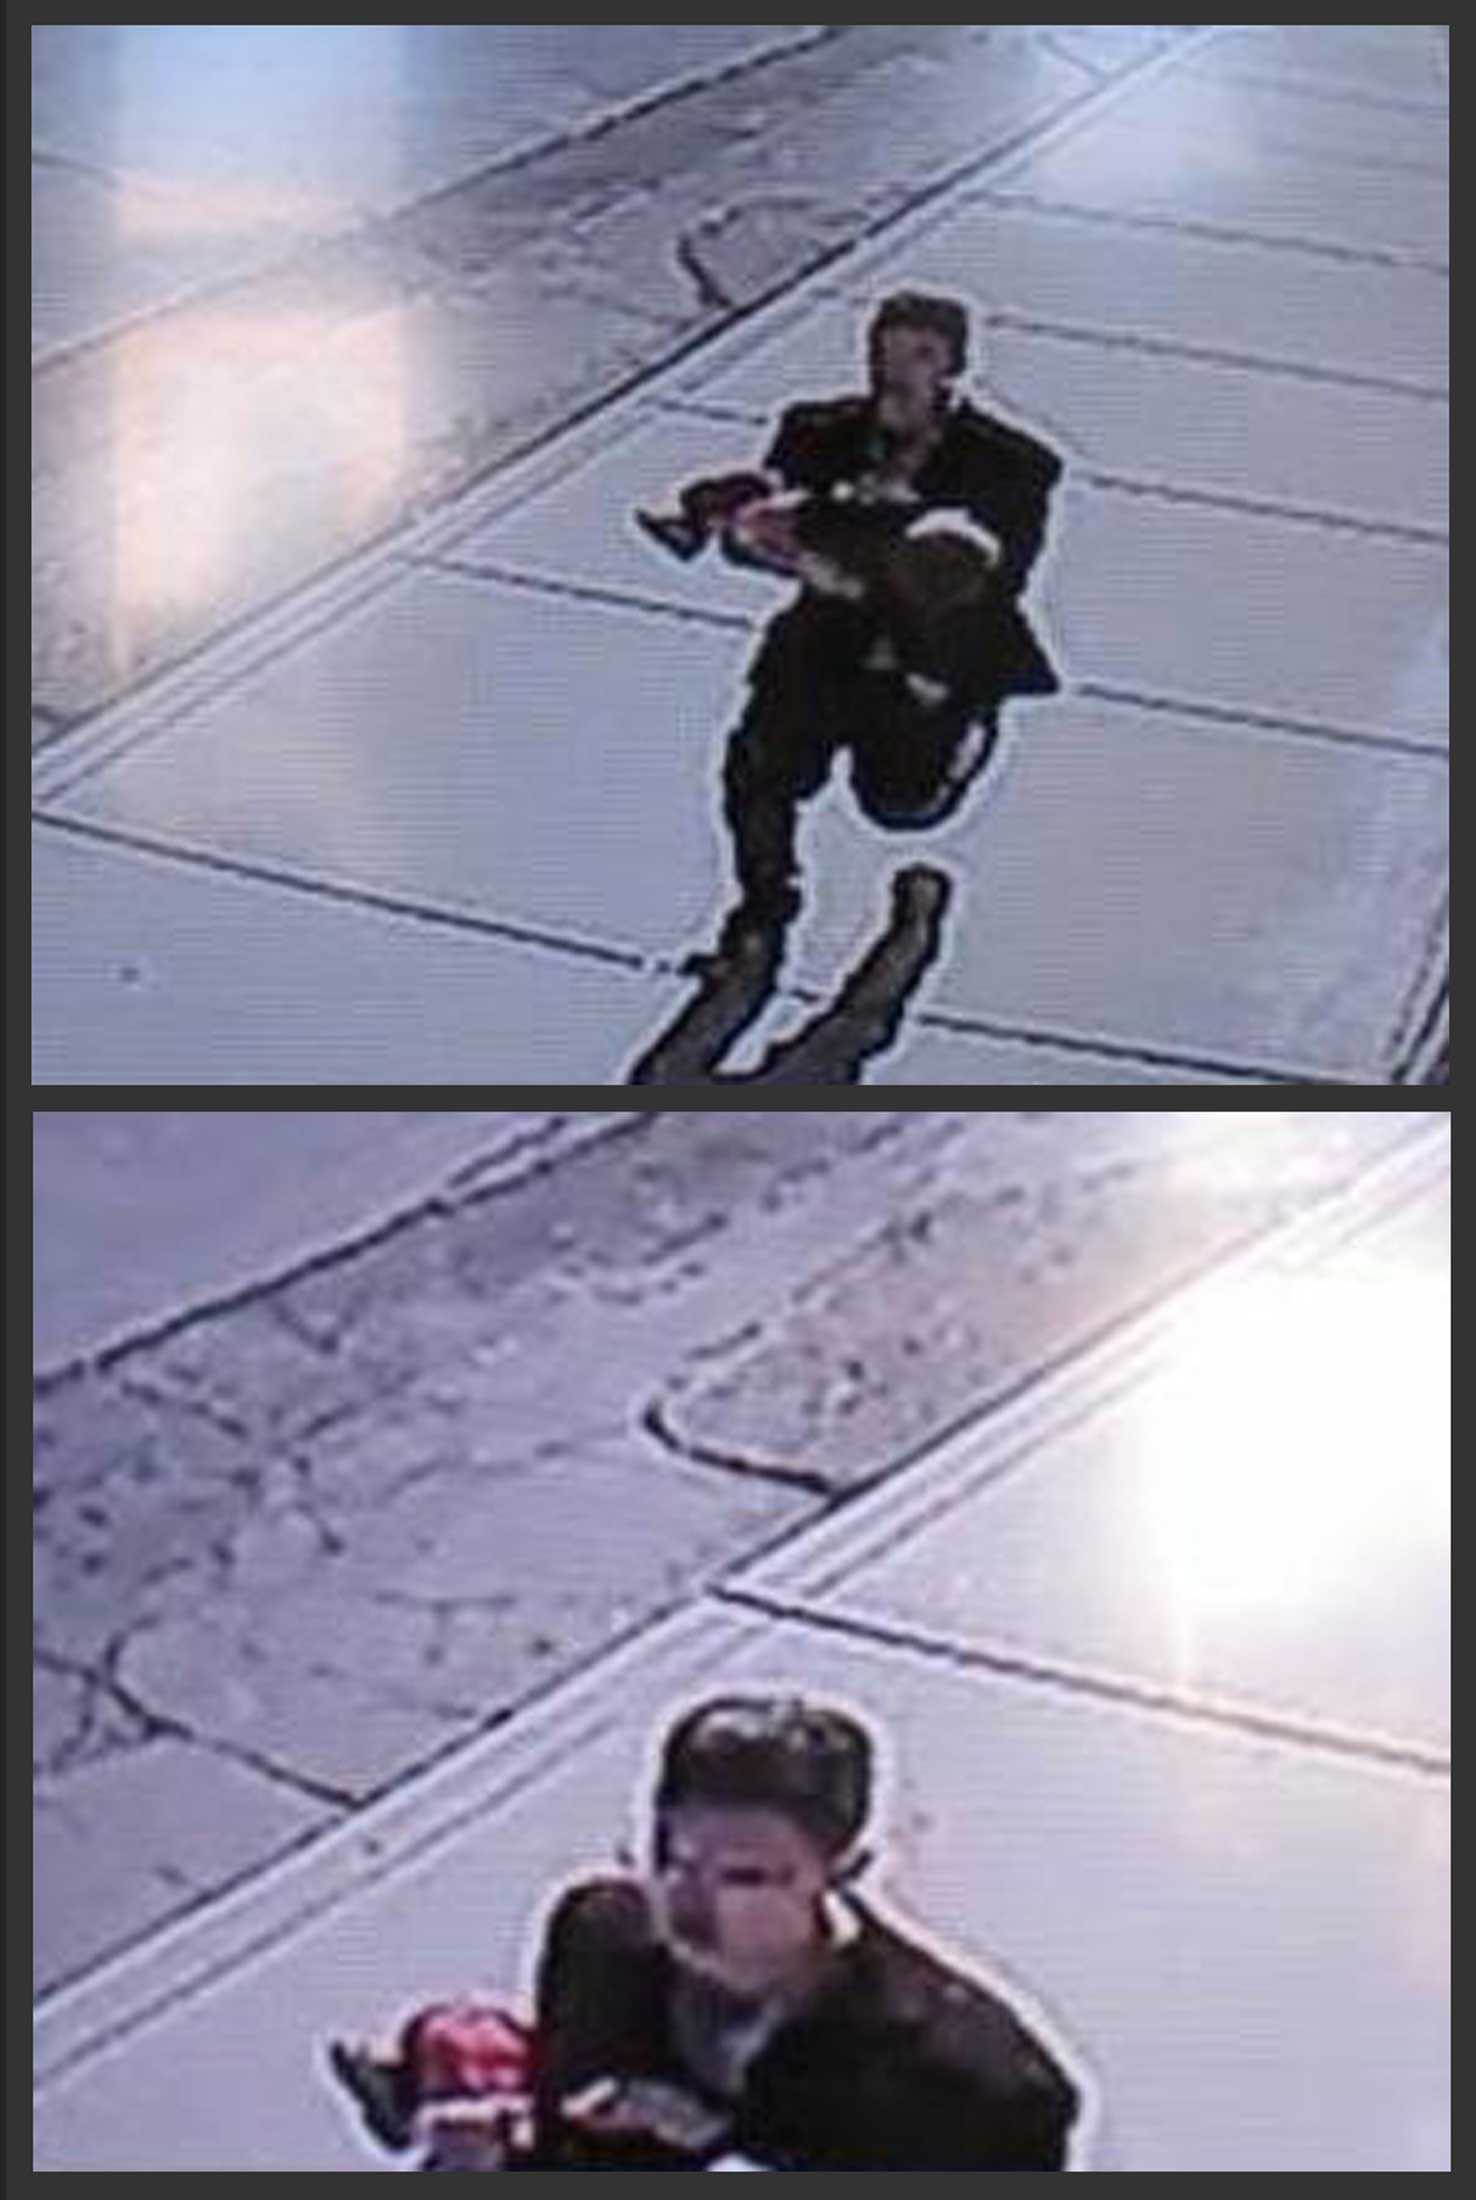 In this combination of still images taken from surveillance video on Sunday, March 8, 2015, and provided by the Lincoln County Sheriff's Office, a man runs down a street, carrying a toddler in an apparent kidnapping attempt in Sprague, Wash. (Lincoln County Sheriff's Office/AP)